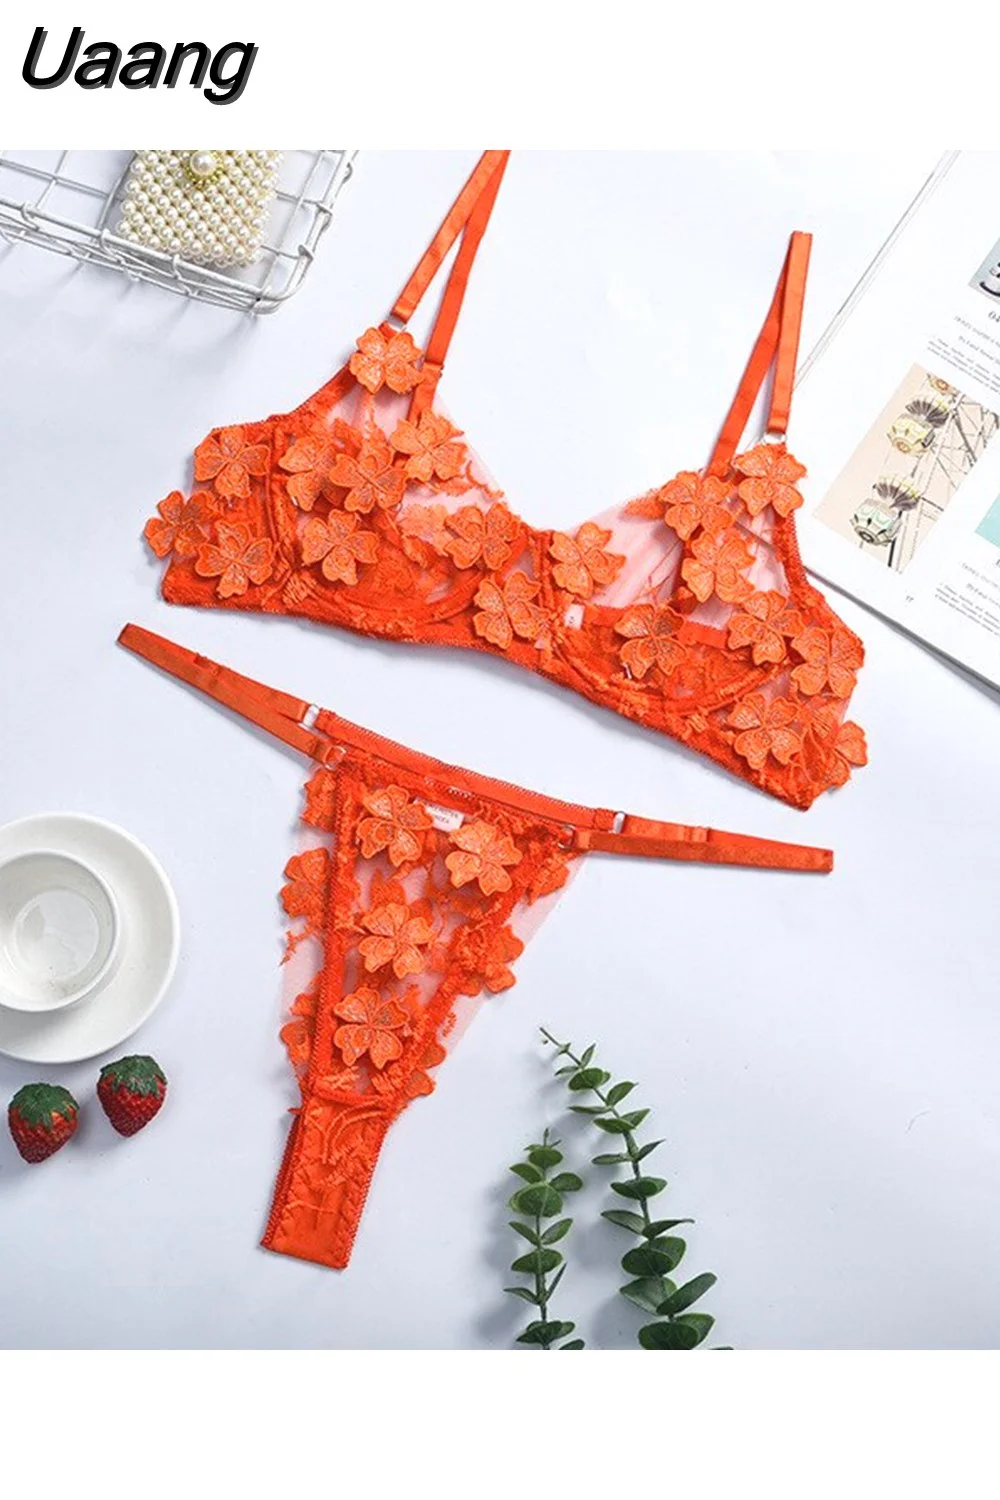 Uaang Sensual Lingerie Set Women 3d Flower Embroidery Underwear Set Ladies Sexy Lace Intimate 7880